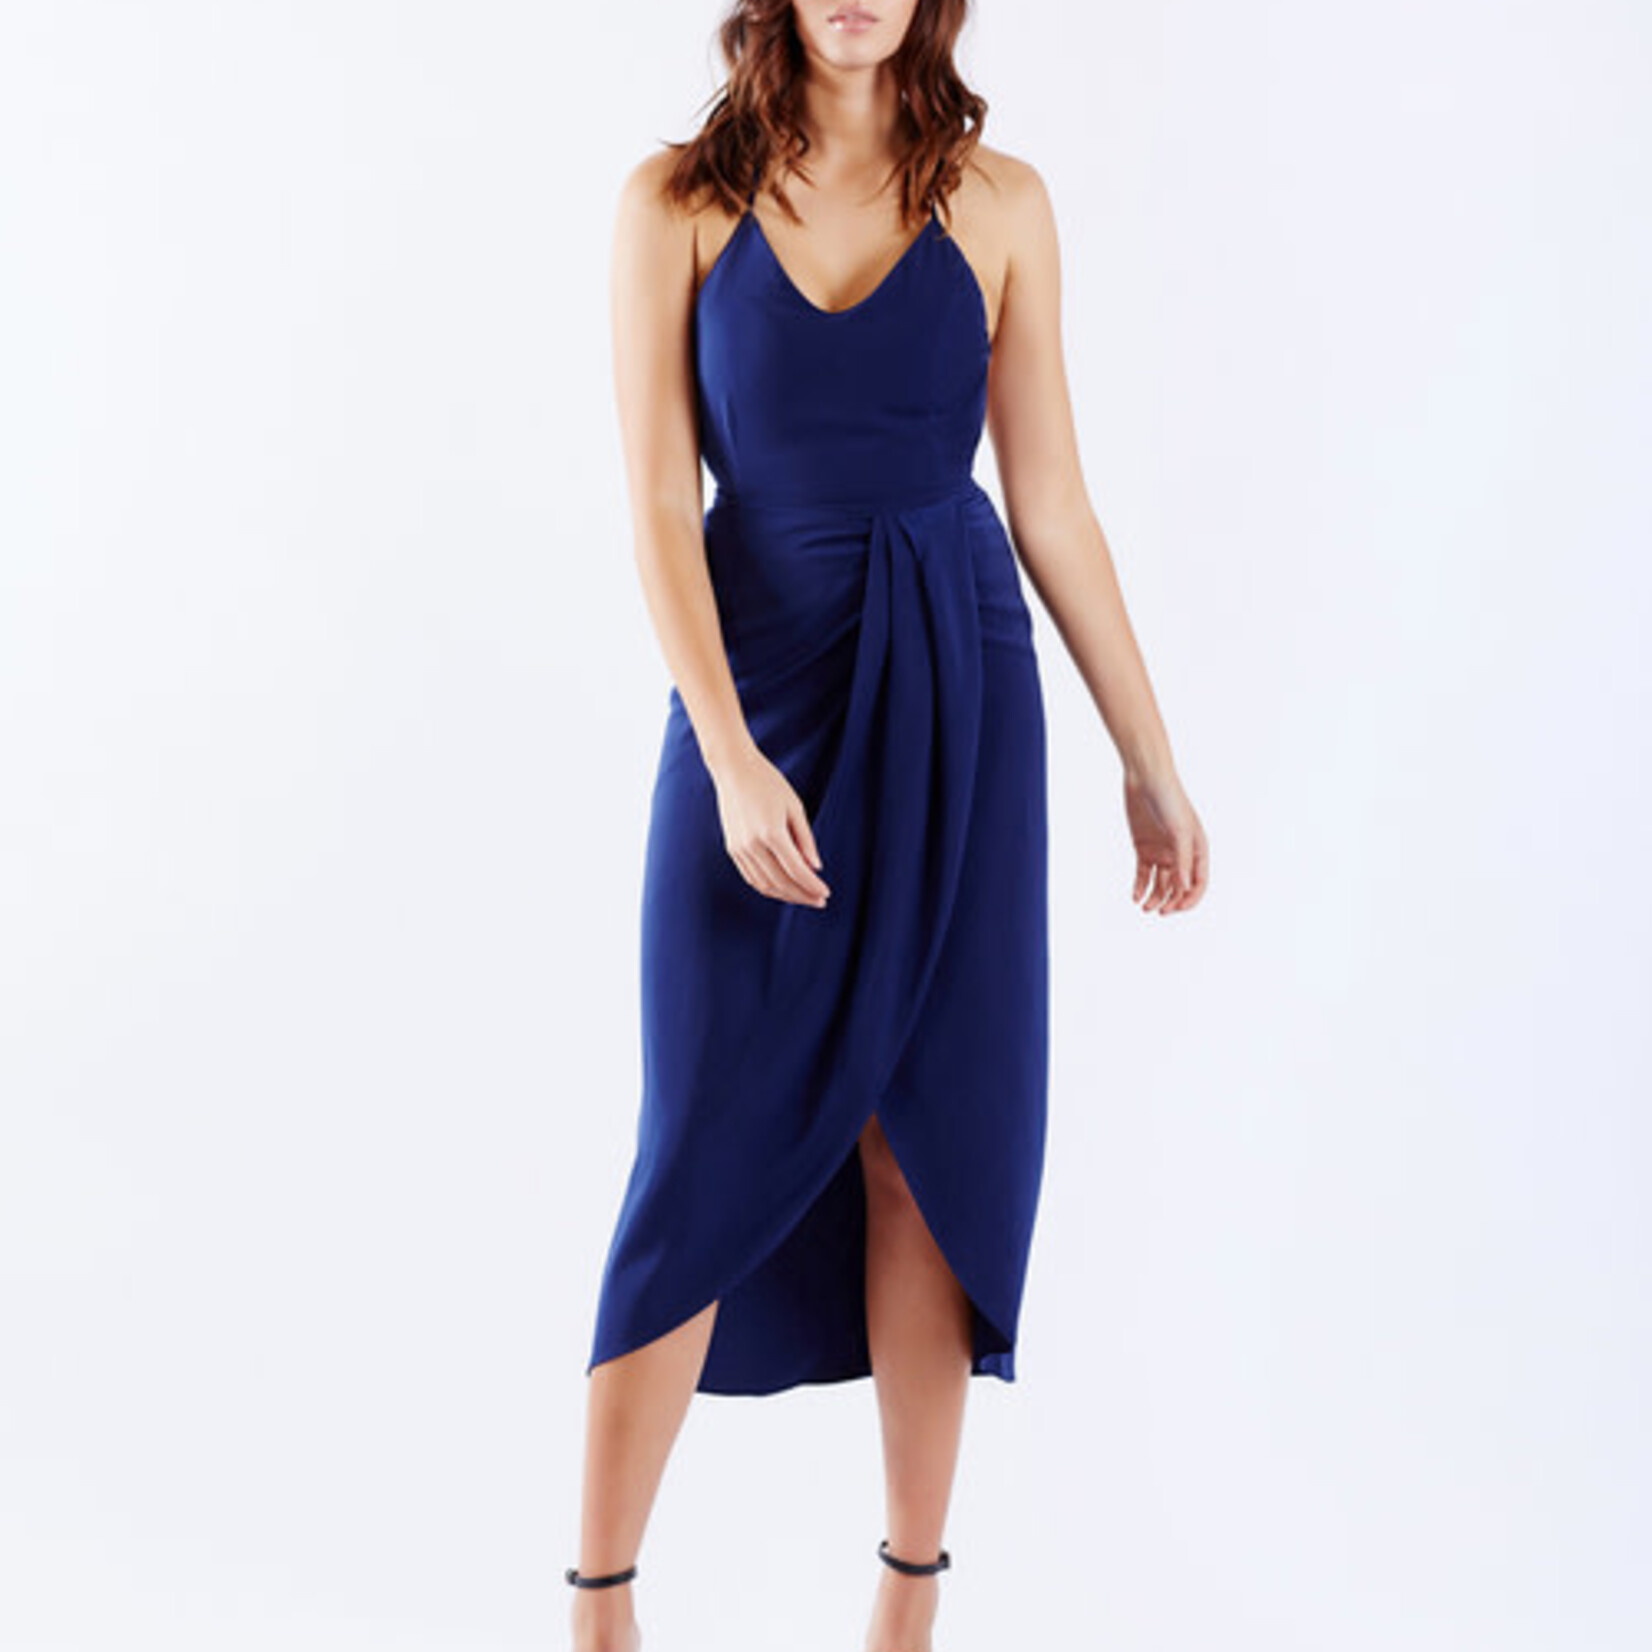 Pizzuto Fashion Navy Cross Tie Back with Ruched Skirt Dress